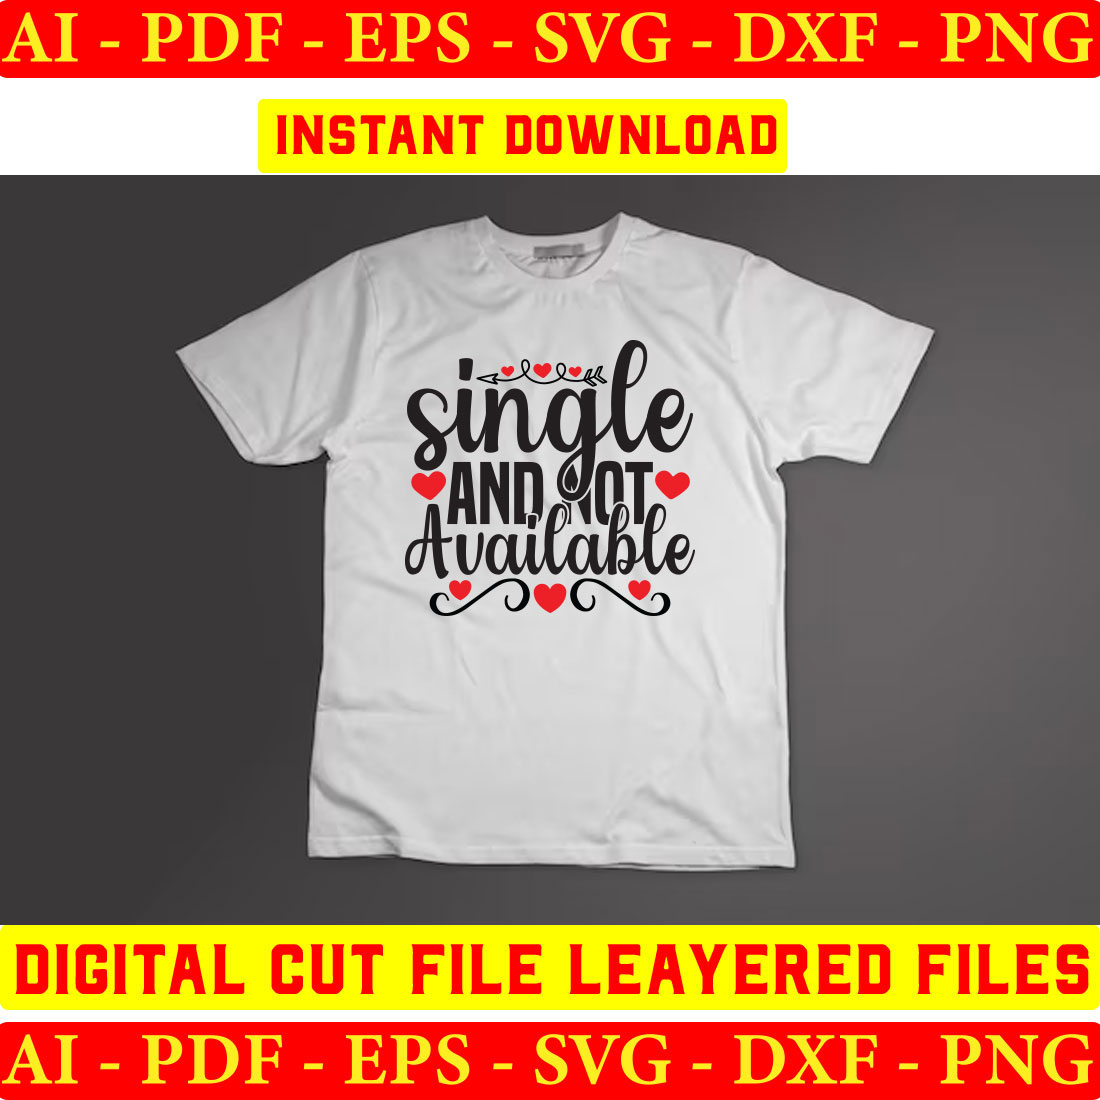 T - shirt with the words single and not available on it.